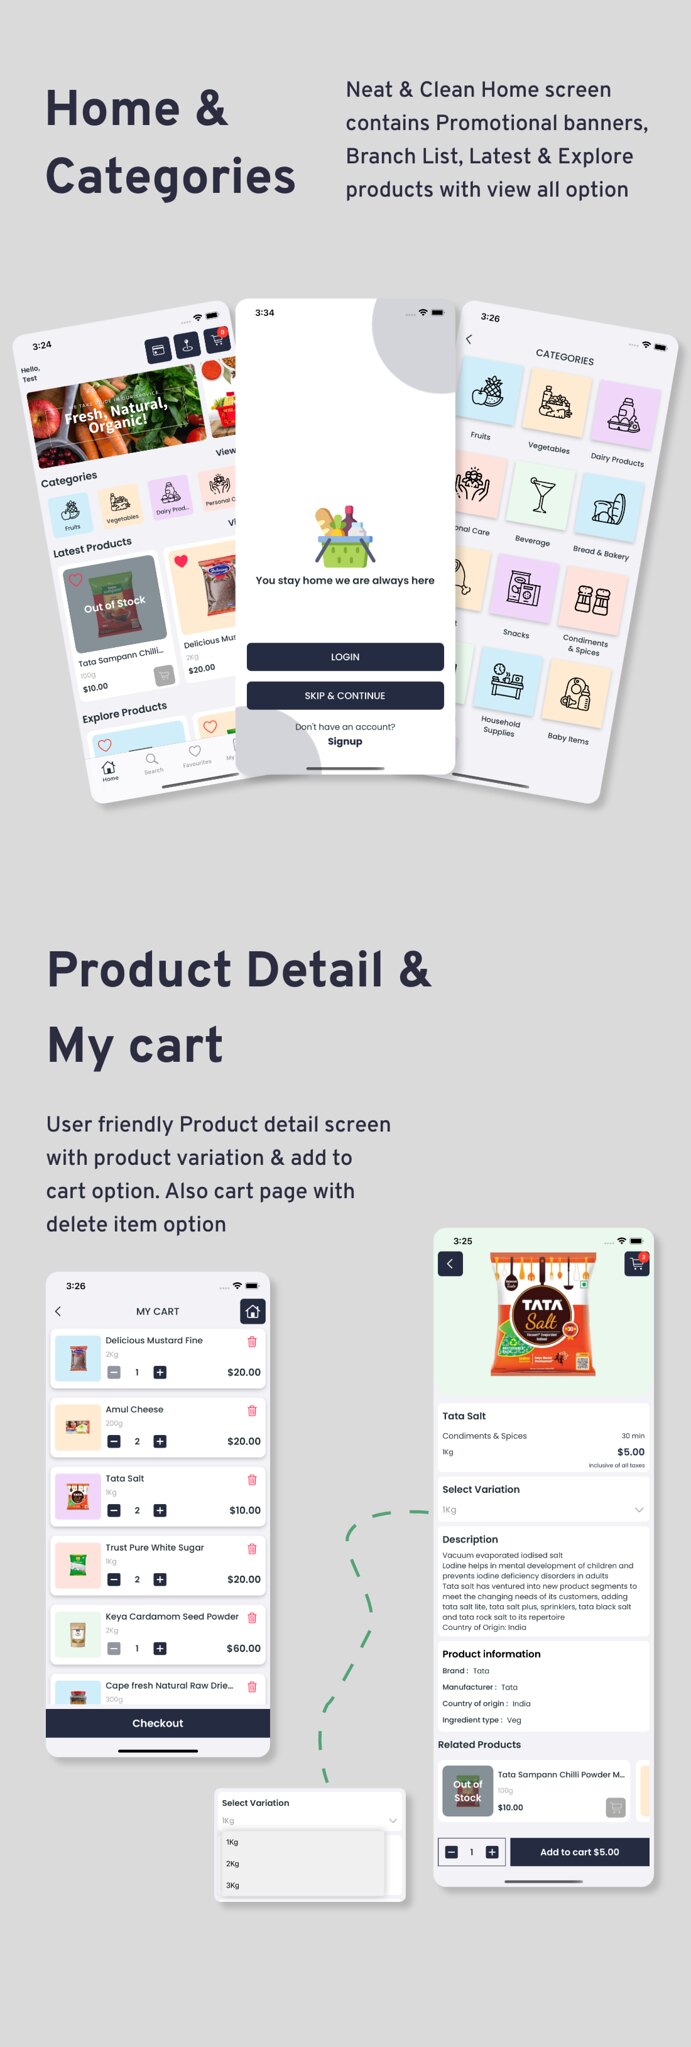 Single Grocery, Food, Pharmacy Store iOS User & Delivery Boy Apps With Backend Admin Panel - 7